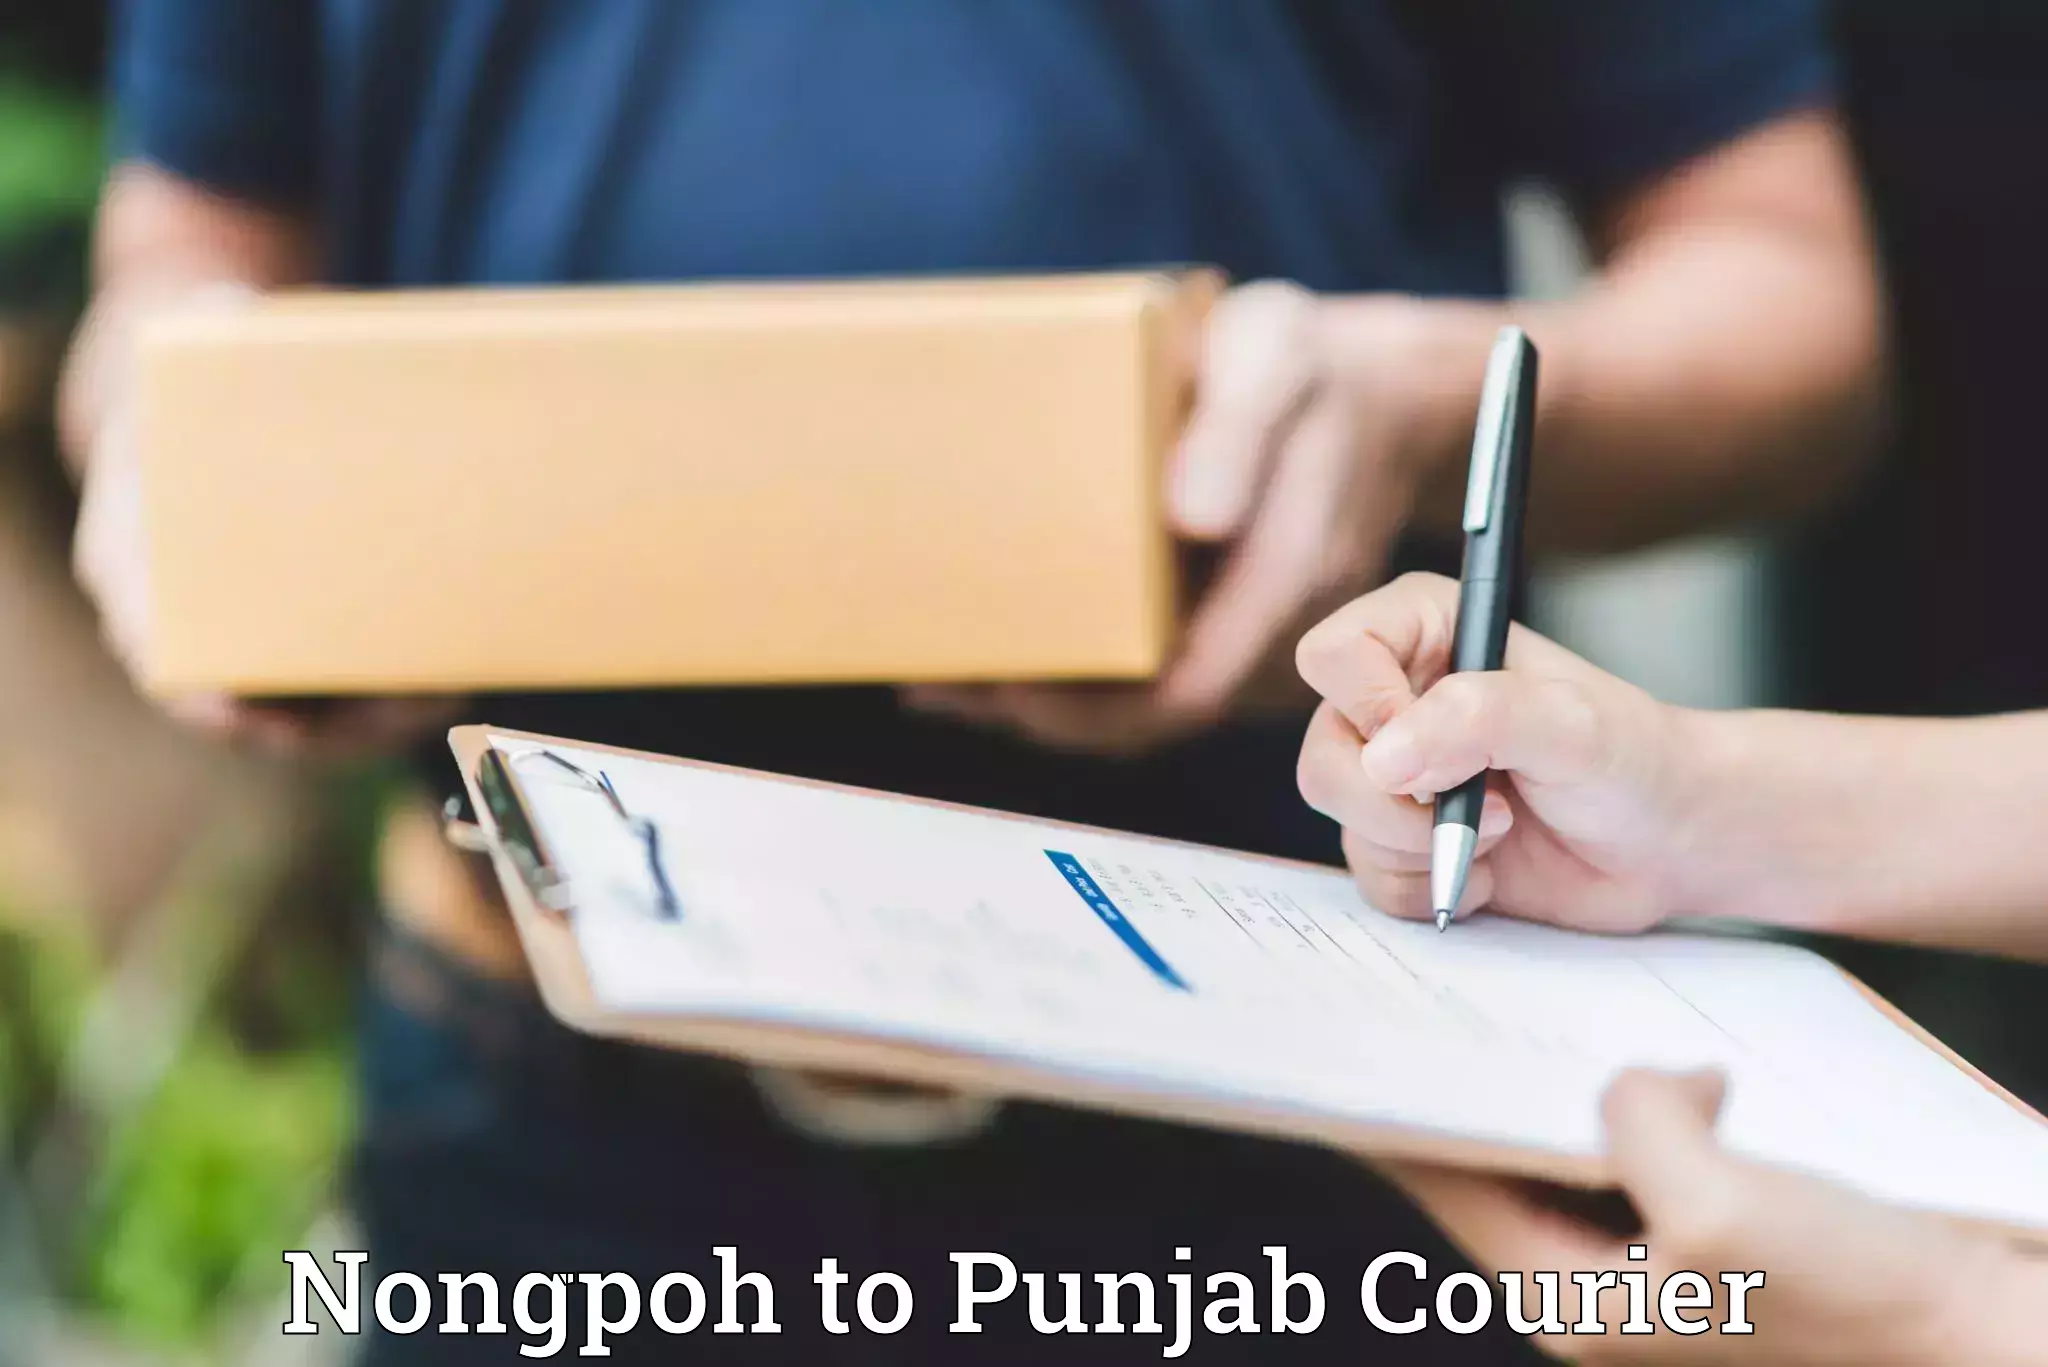 Trusted relocation experts Nongpoh to Punjab